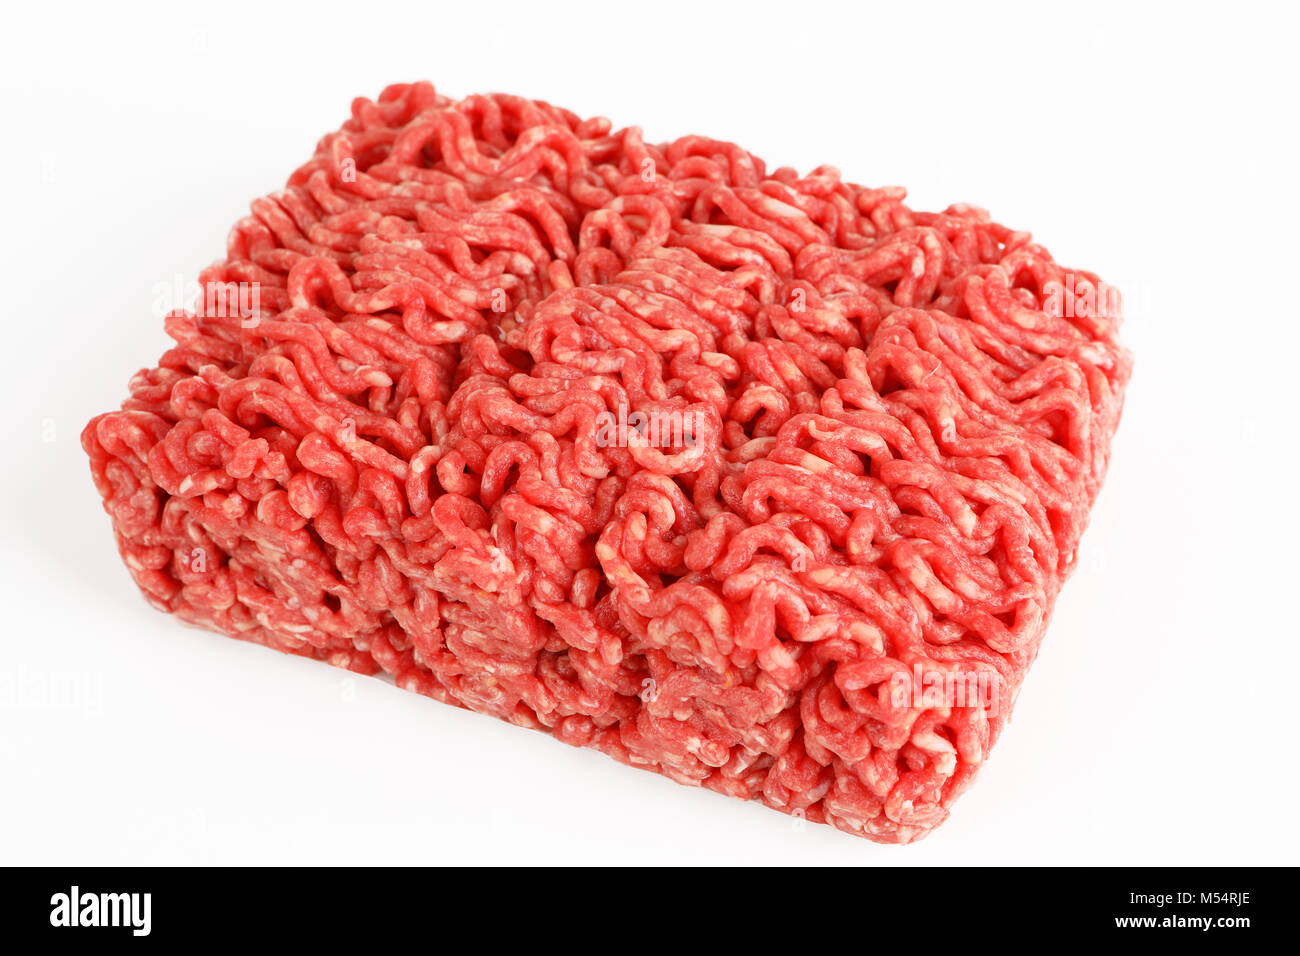 raw minced beef meat Stock Photo